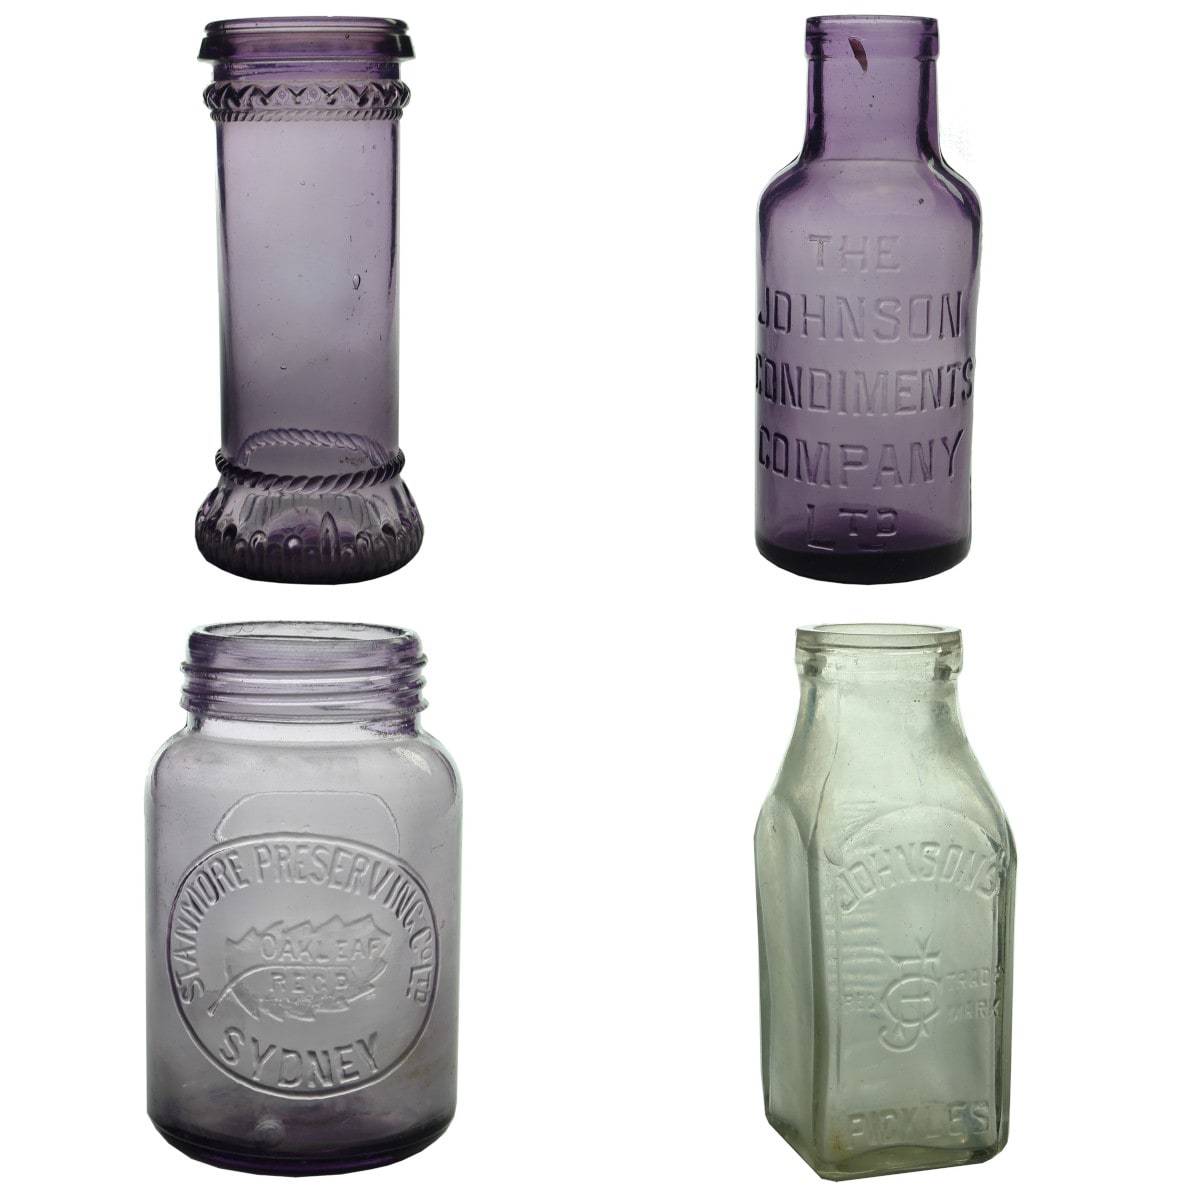 Four Preserves Jars: MM Monogram in Fowlers type; Johnson Condiments Co; Stanmore Preserving Sydney; C. F. Johnson.